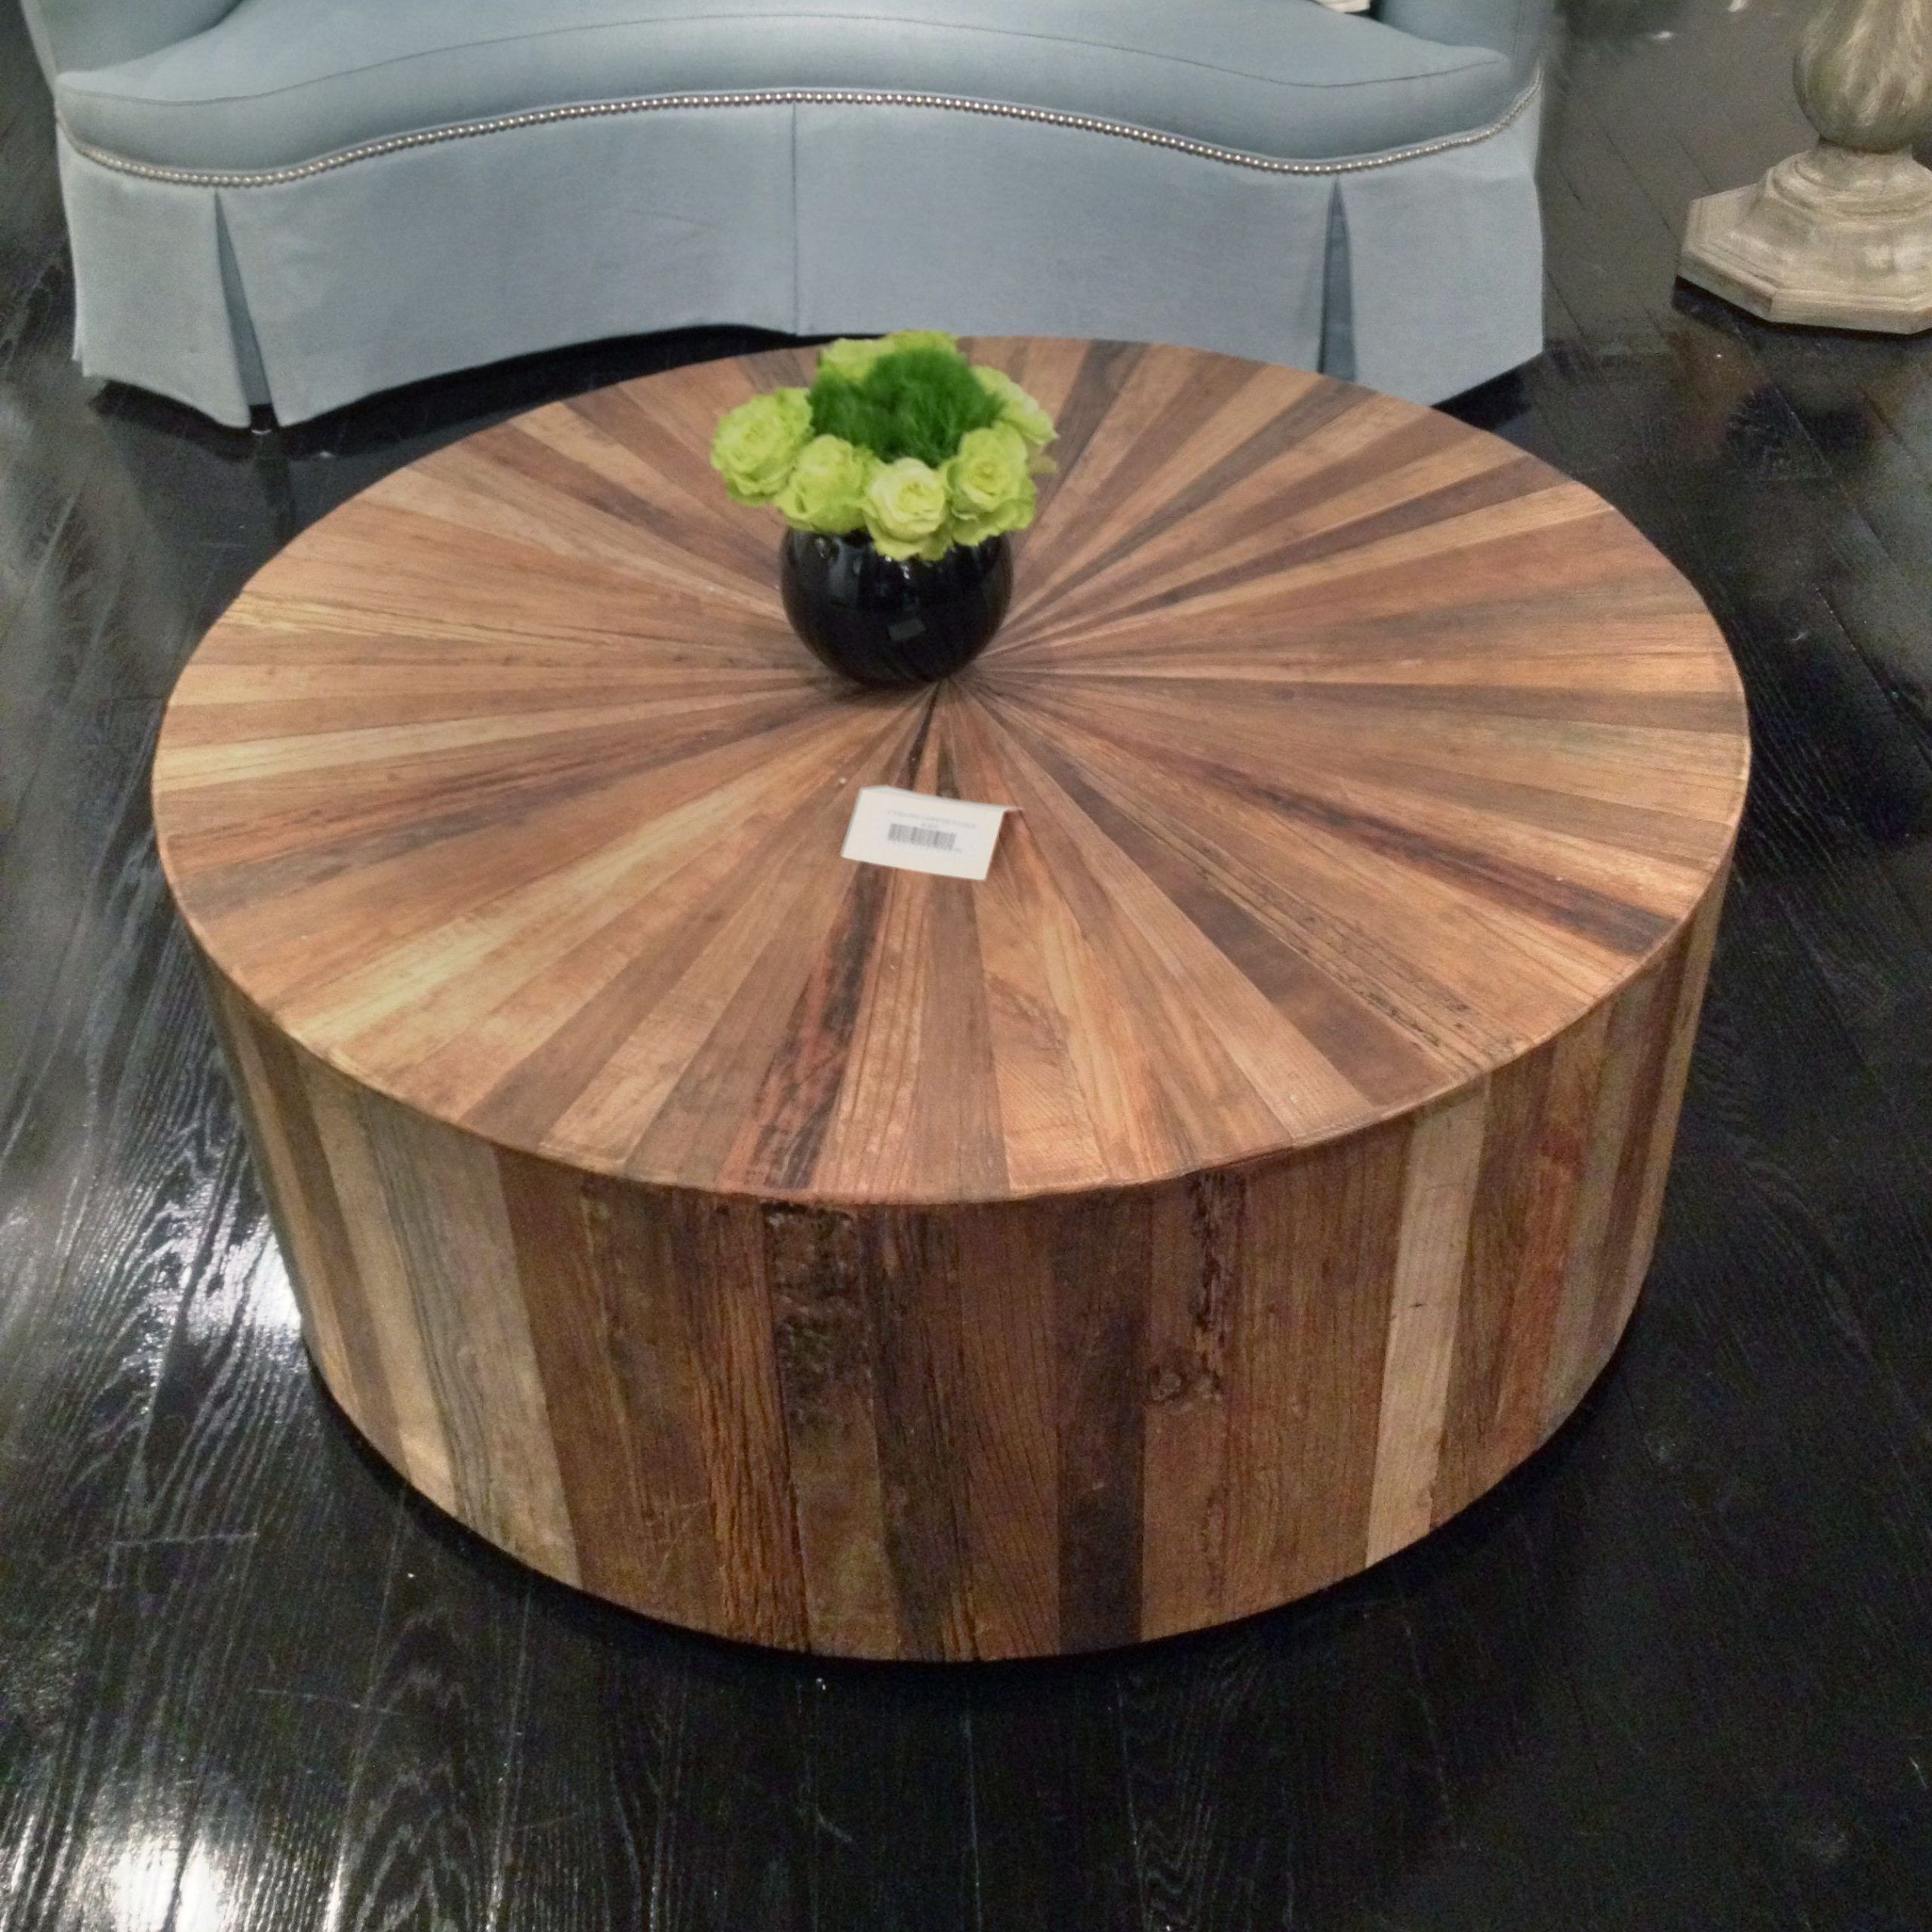 Round Wood Coffee Tables With Storage : Yj Round Storage Coffee Table Intended For Round Coffee Tables (Gallery 9 of 20)